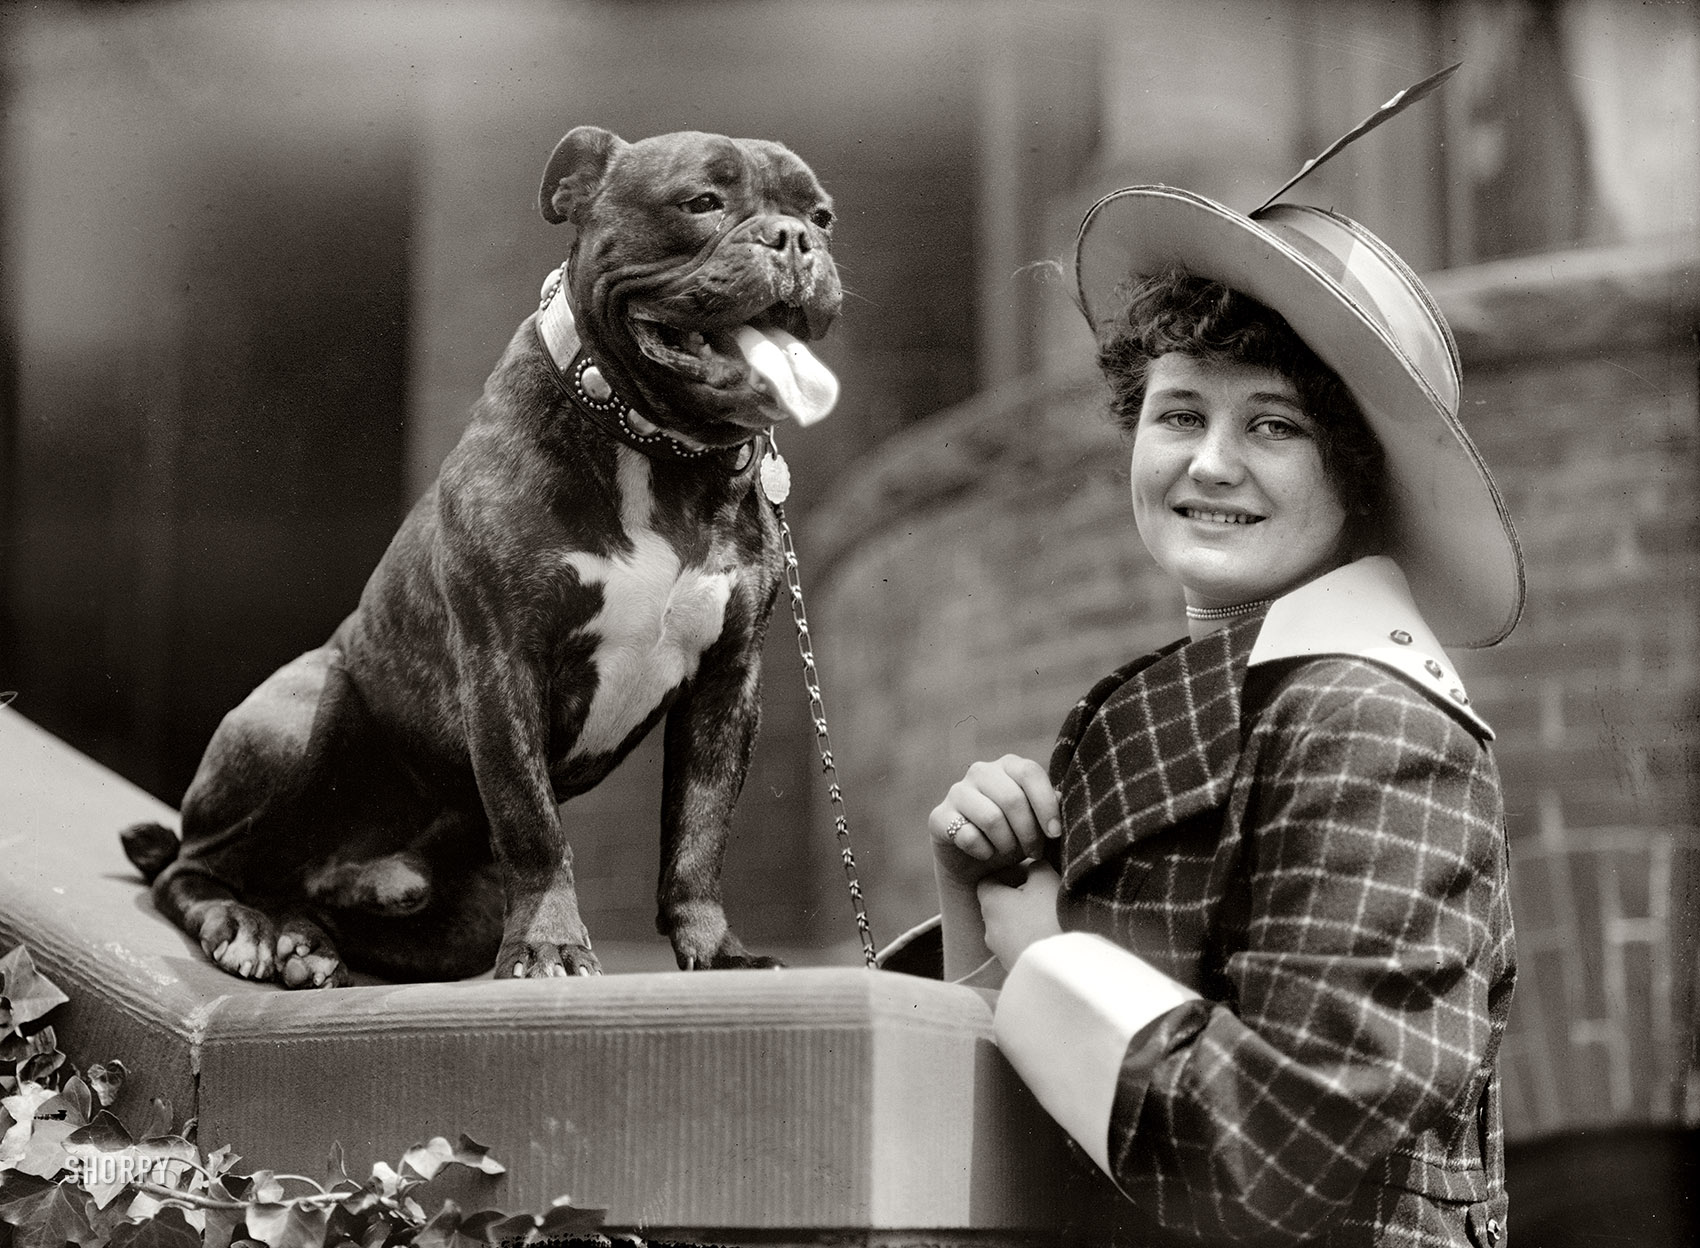 1915. Washington, D.C. "Miss Edith Gracie -- dog show." Harris & Ewing Collection glass negative. View full size.